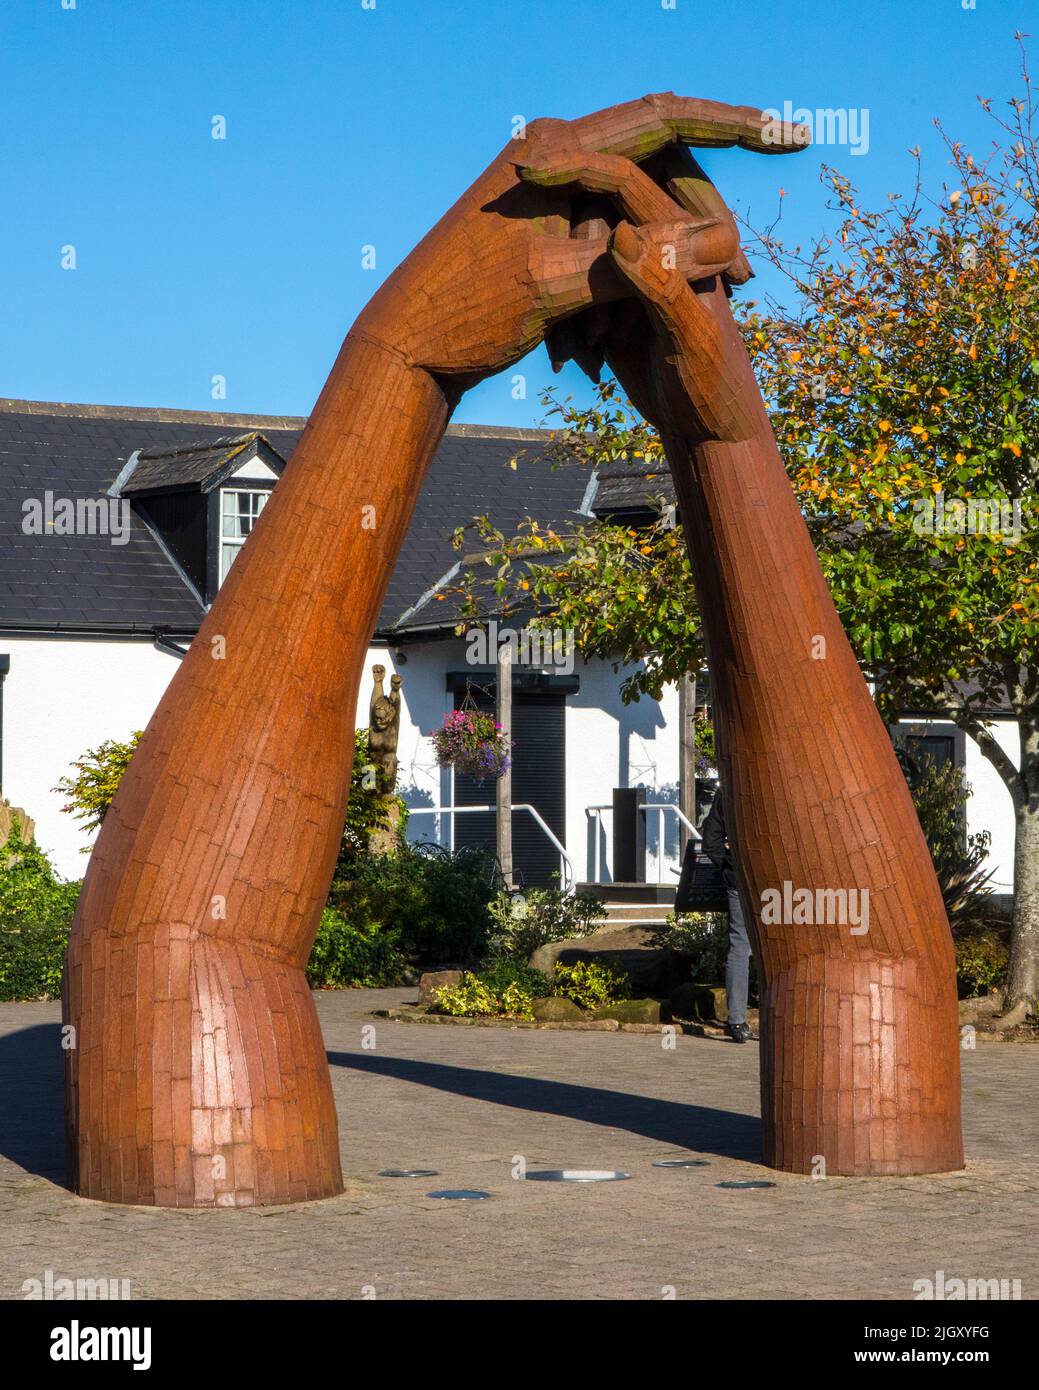 Gretna Green, Scotland - October 15th 2021: Clasping Hands sculpture in the village of Gretna Green, Scotland. The location is famous for eloping coup Stock Photo